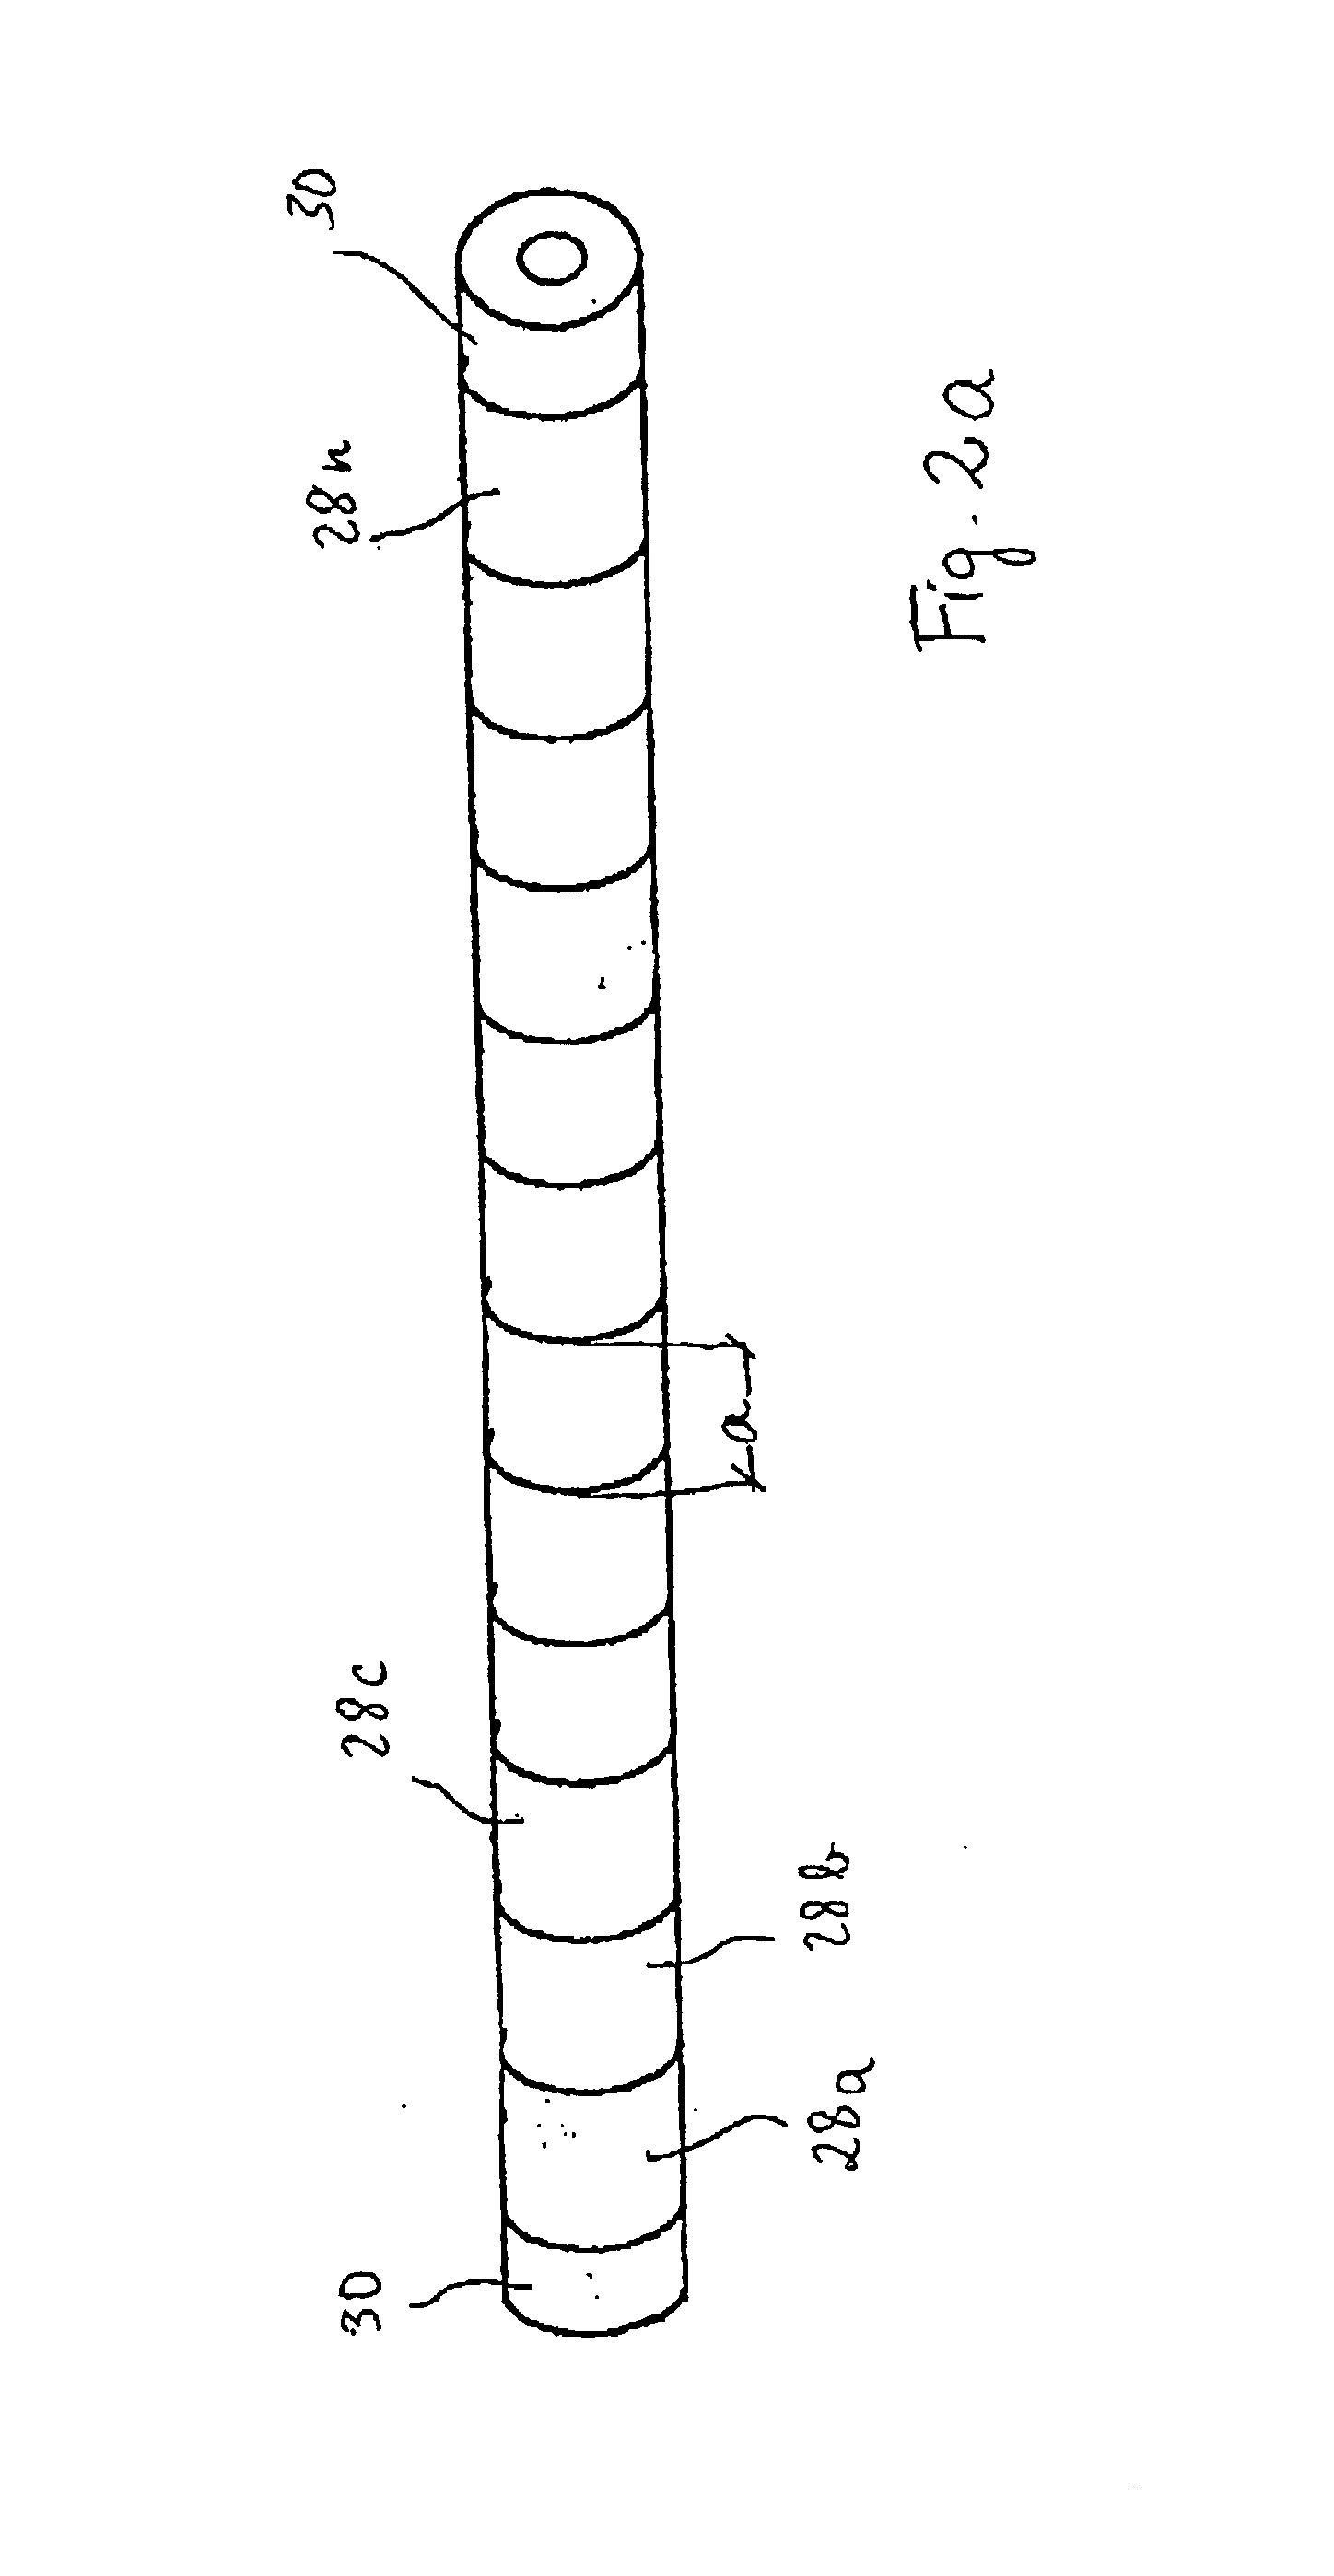 Device and method for applying a spot embossing pattern to a web of multi-ply tissue paper